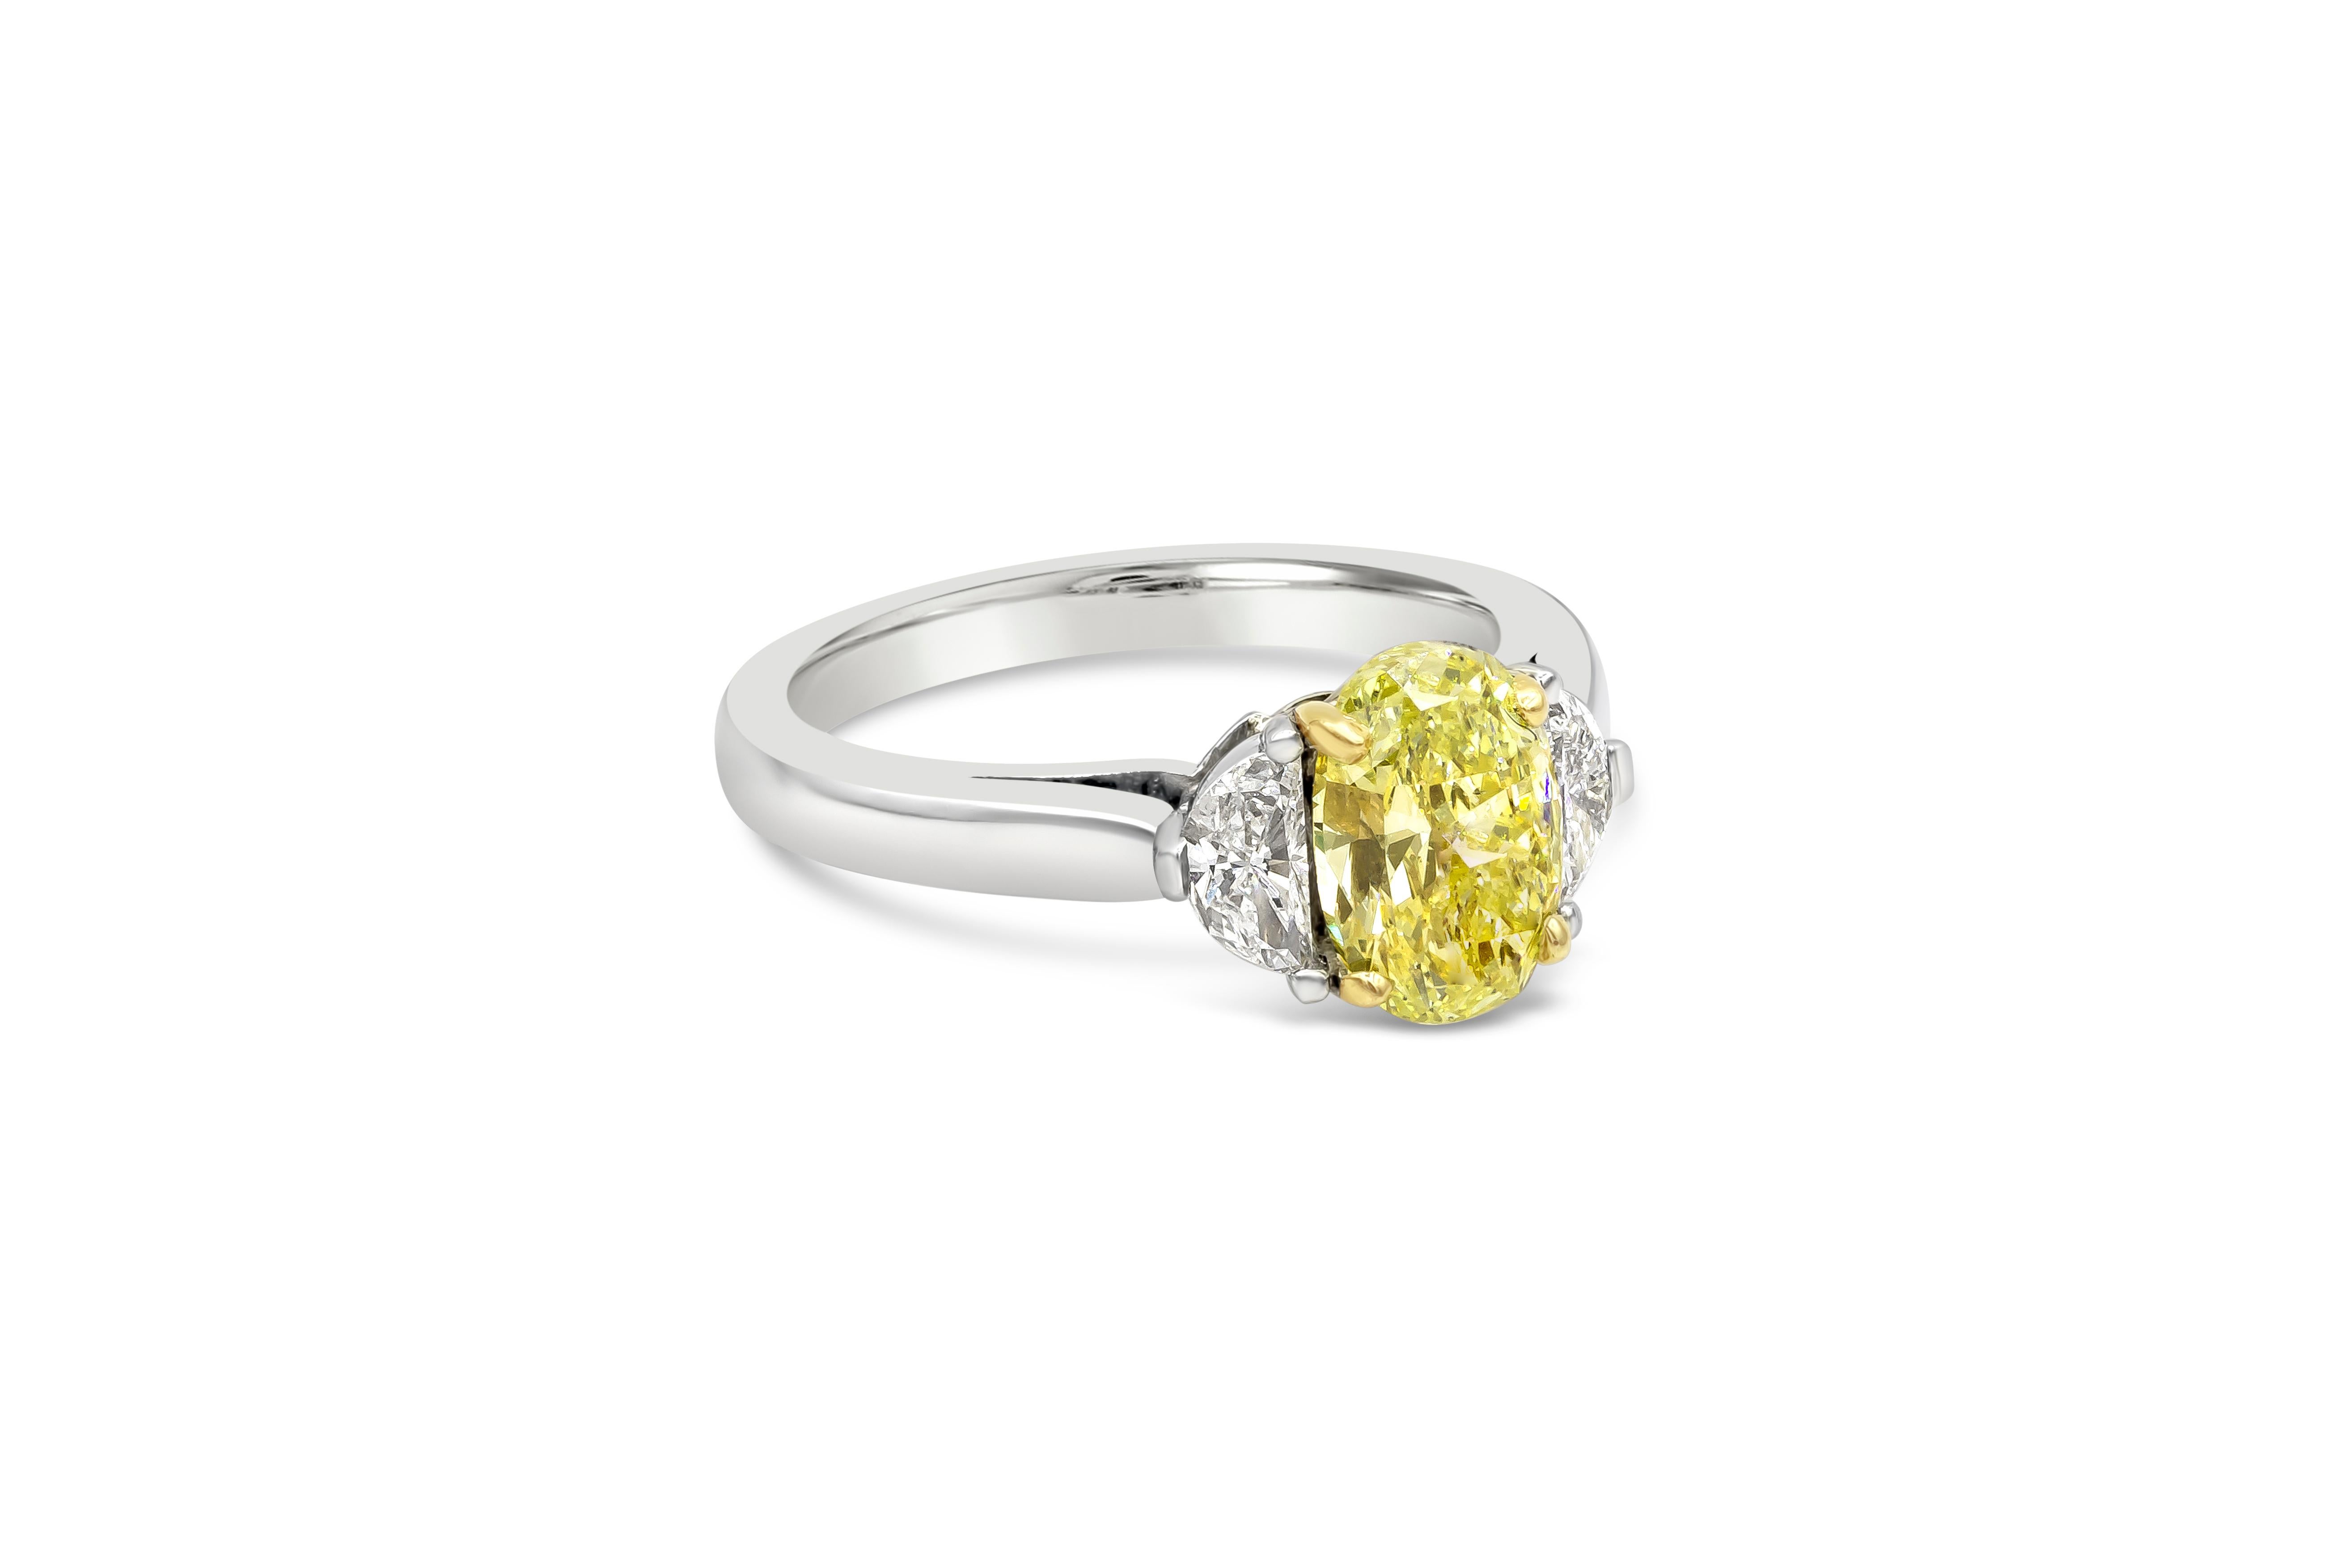 A classic three-stone engagement ring style showcasing a 1.50 carat color-rich oval diamond certified by GIA as fancy Intense Yellow color. Flanking the center are half moon diamonds on each side weighing 0.29 carats total. Set in a handcrafted